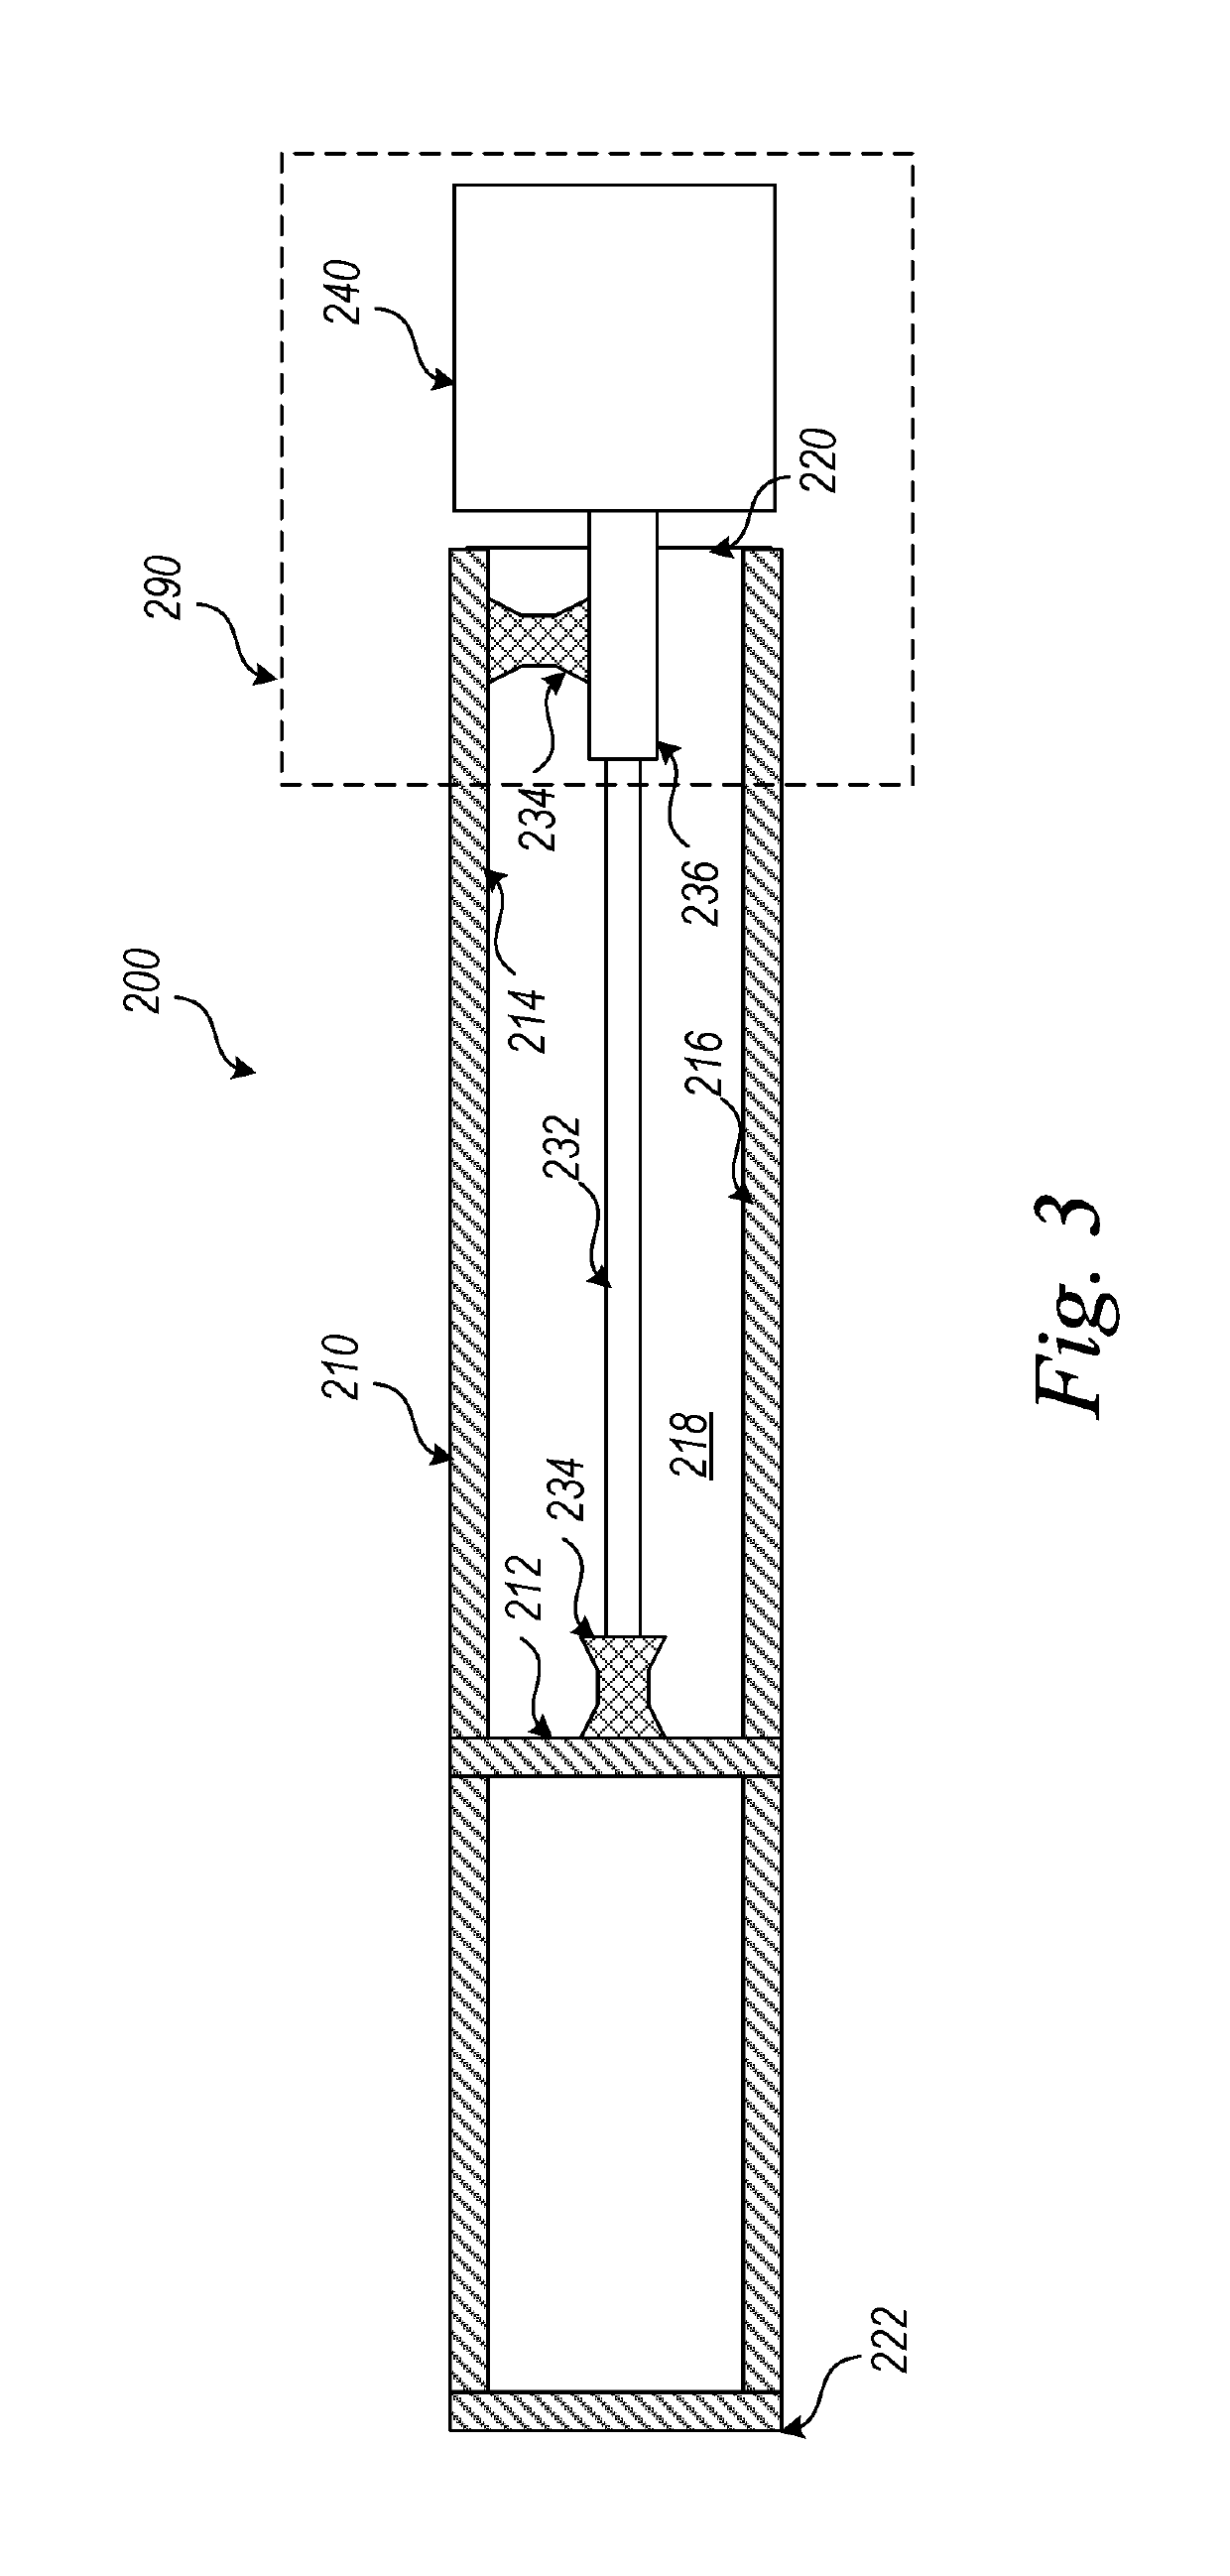 Counter-balanced suspended image stabilization system